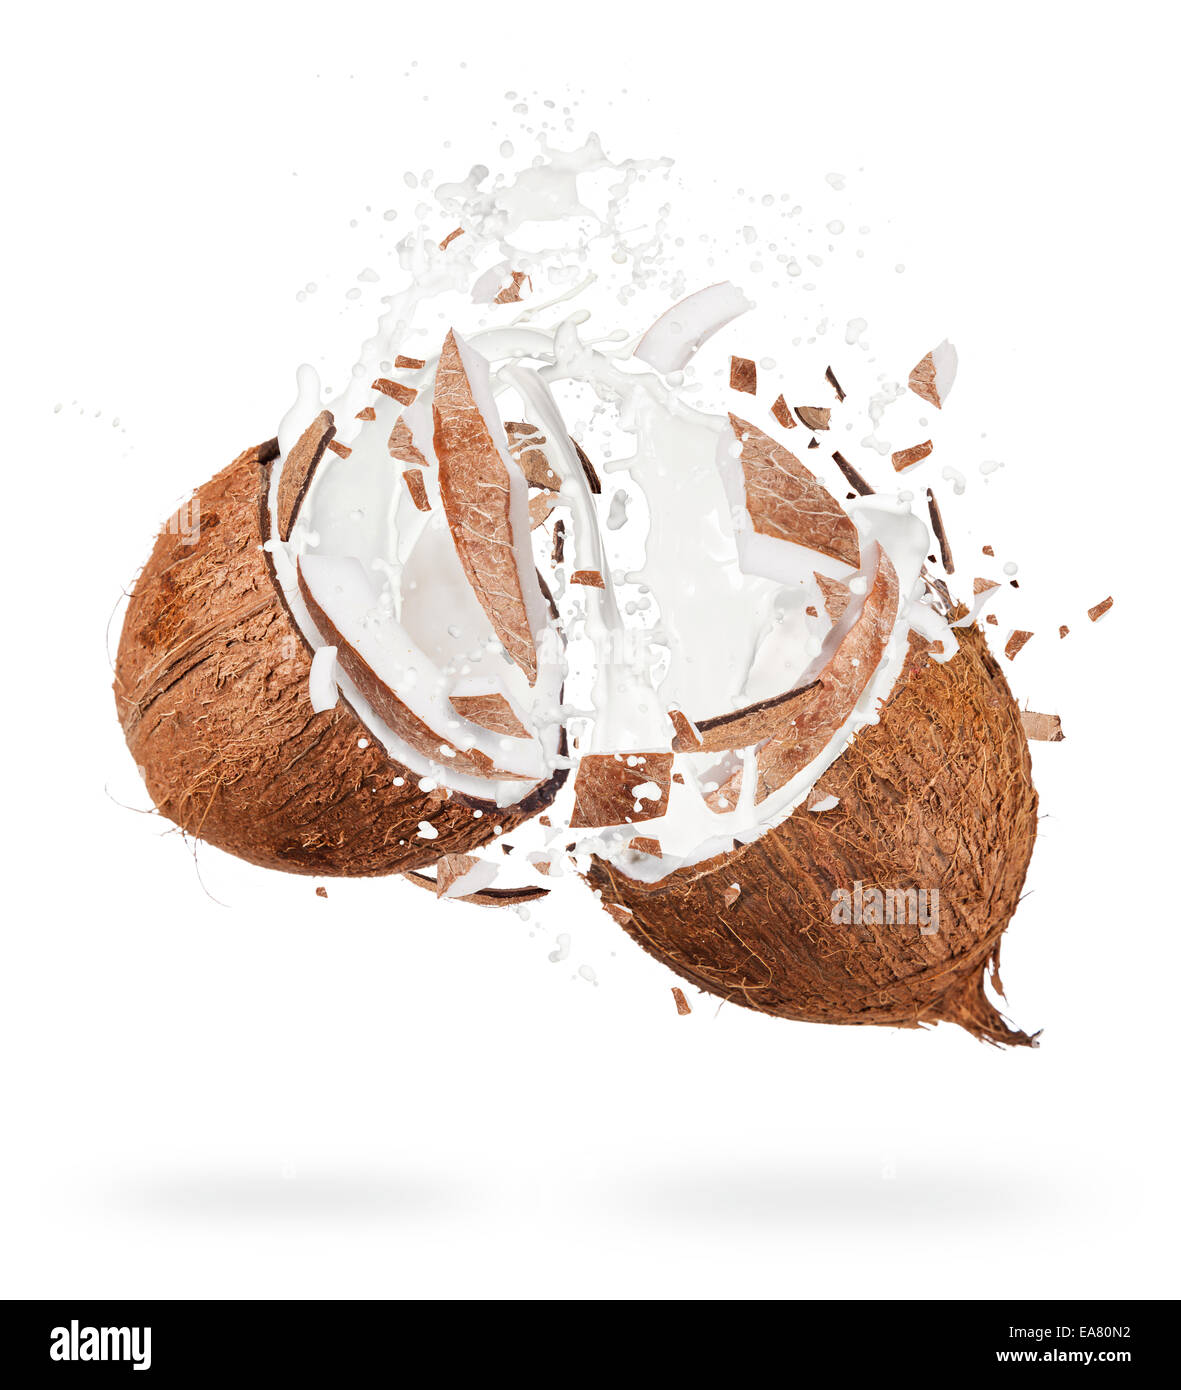 Isolated shot of cracked coconuts with water splash on white background Stock Photo